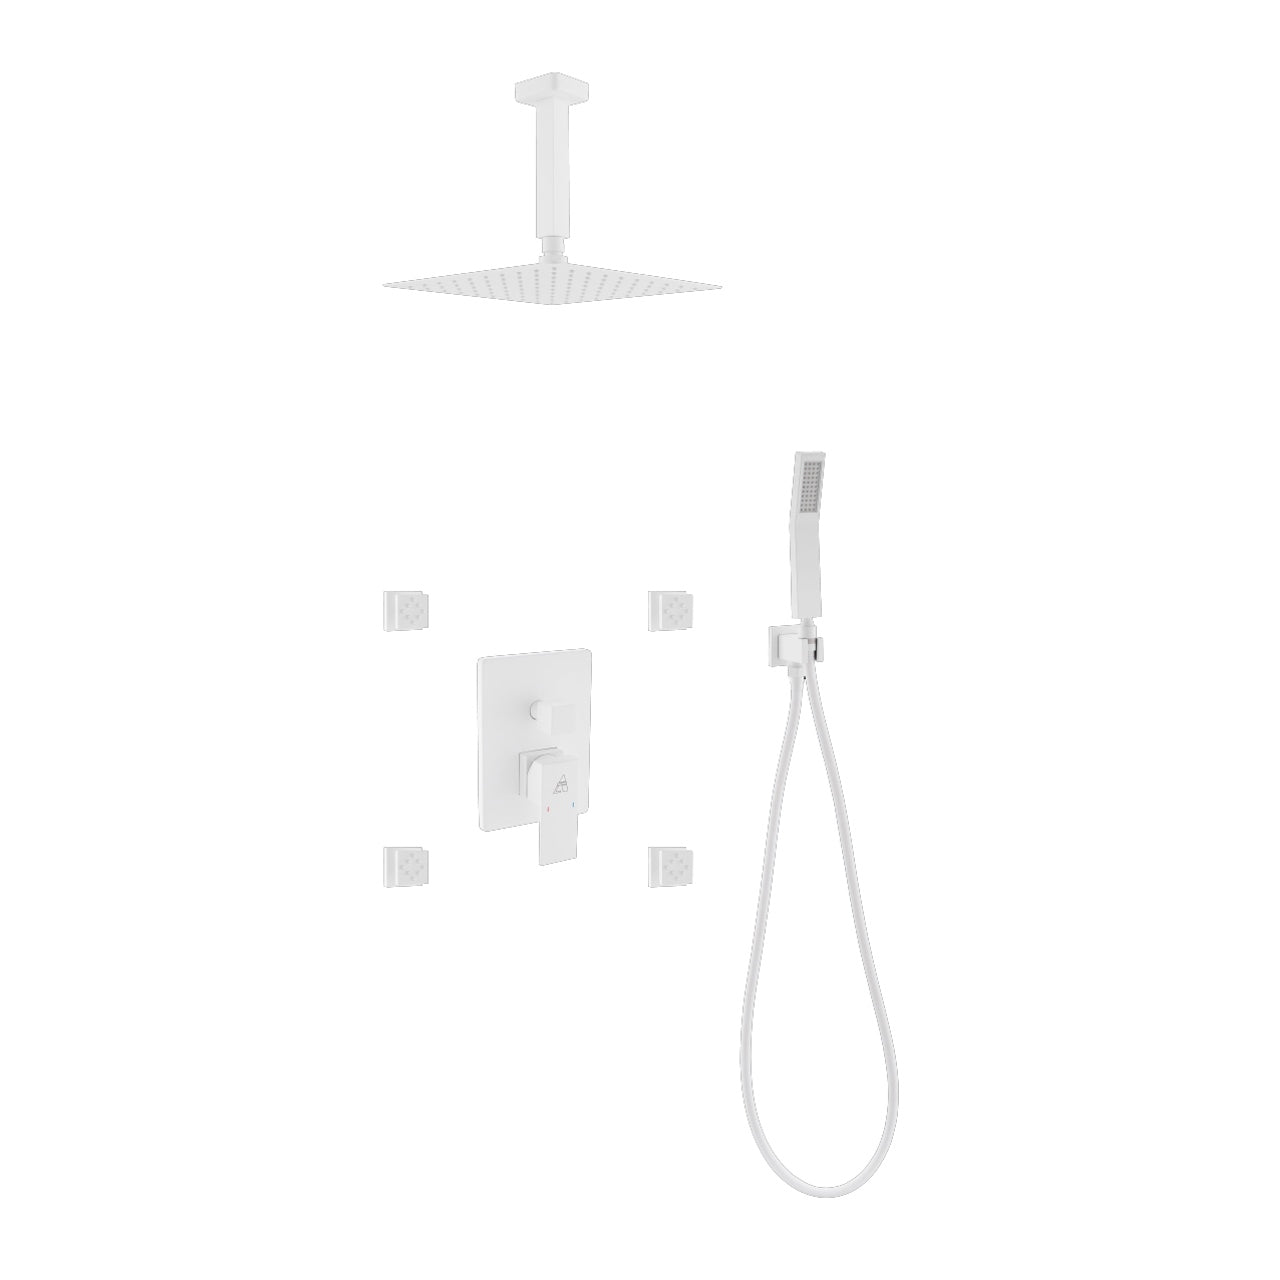 Aqua Piazza Brass Shower Set with Ceiling Mount Square Rain Shower, Handheld and 4 Body Jets - Home and Bath Depot